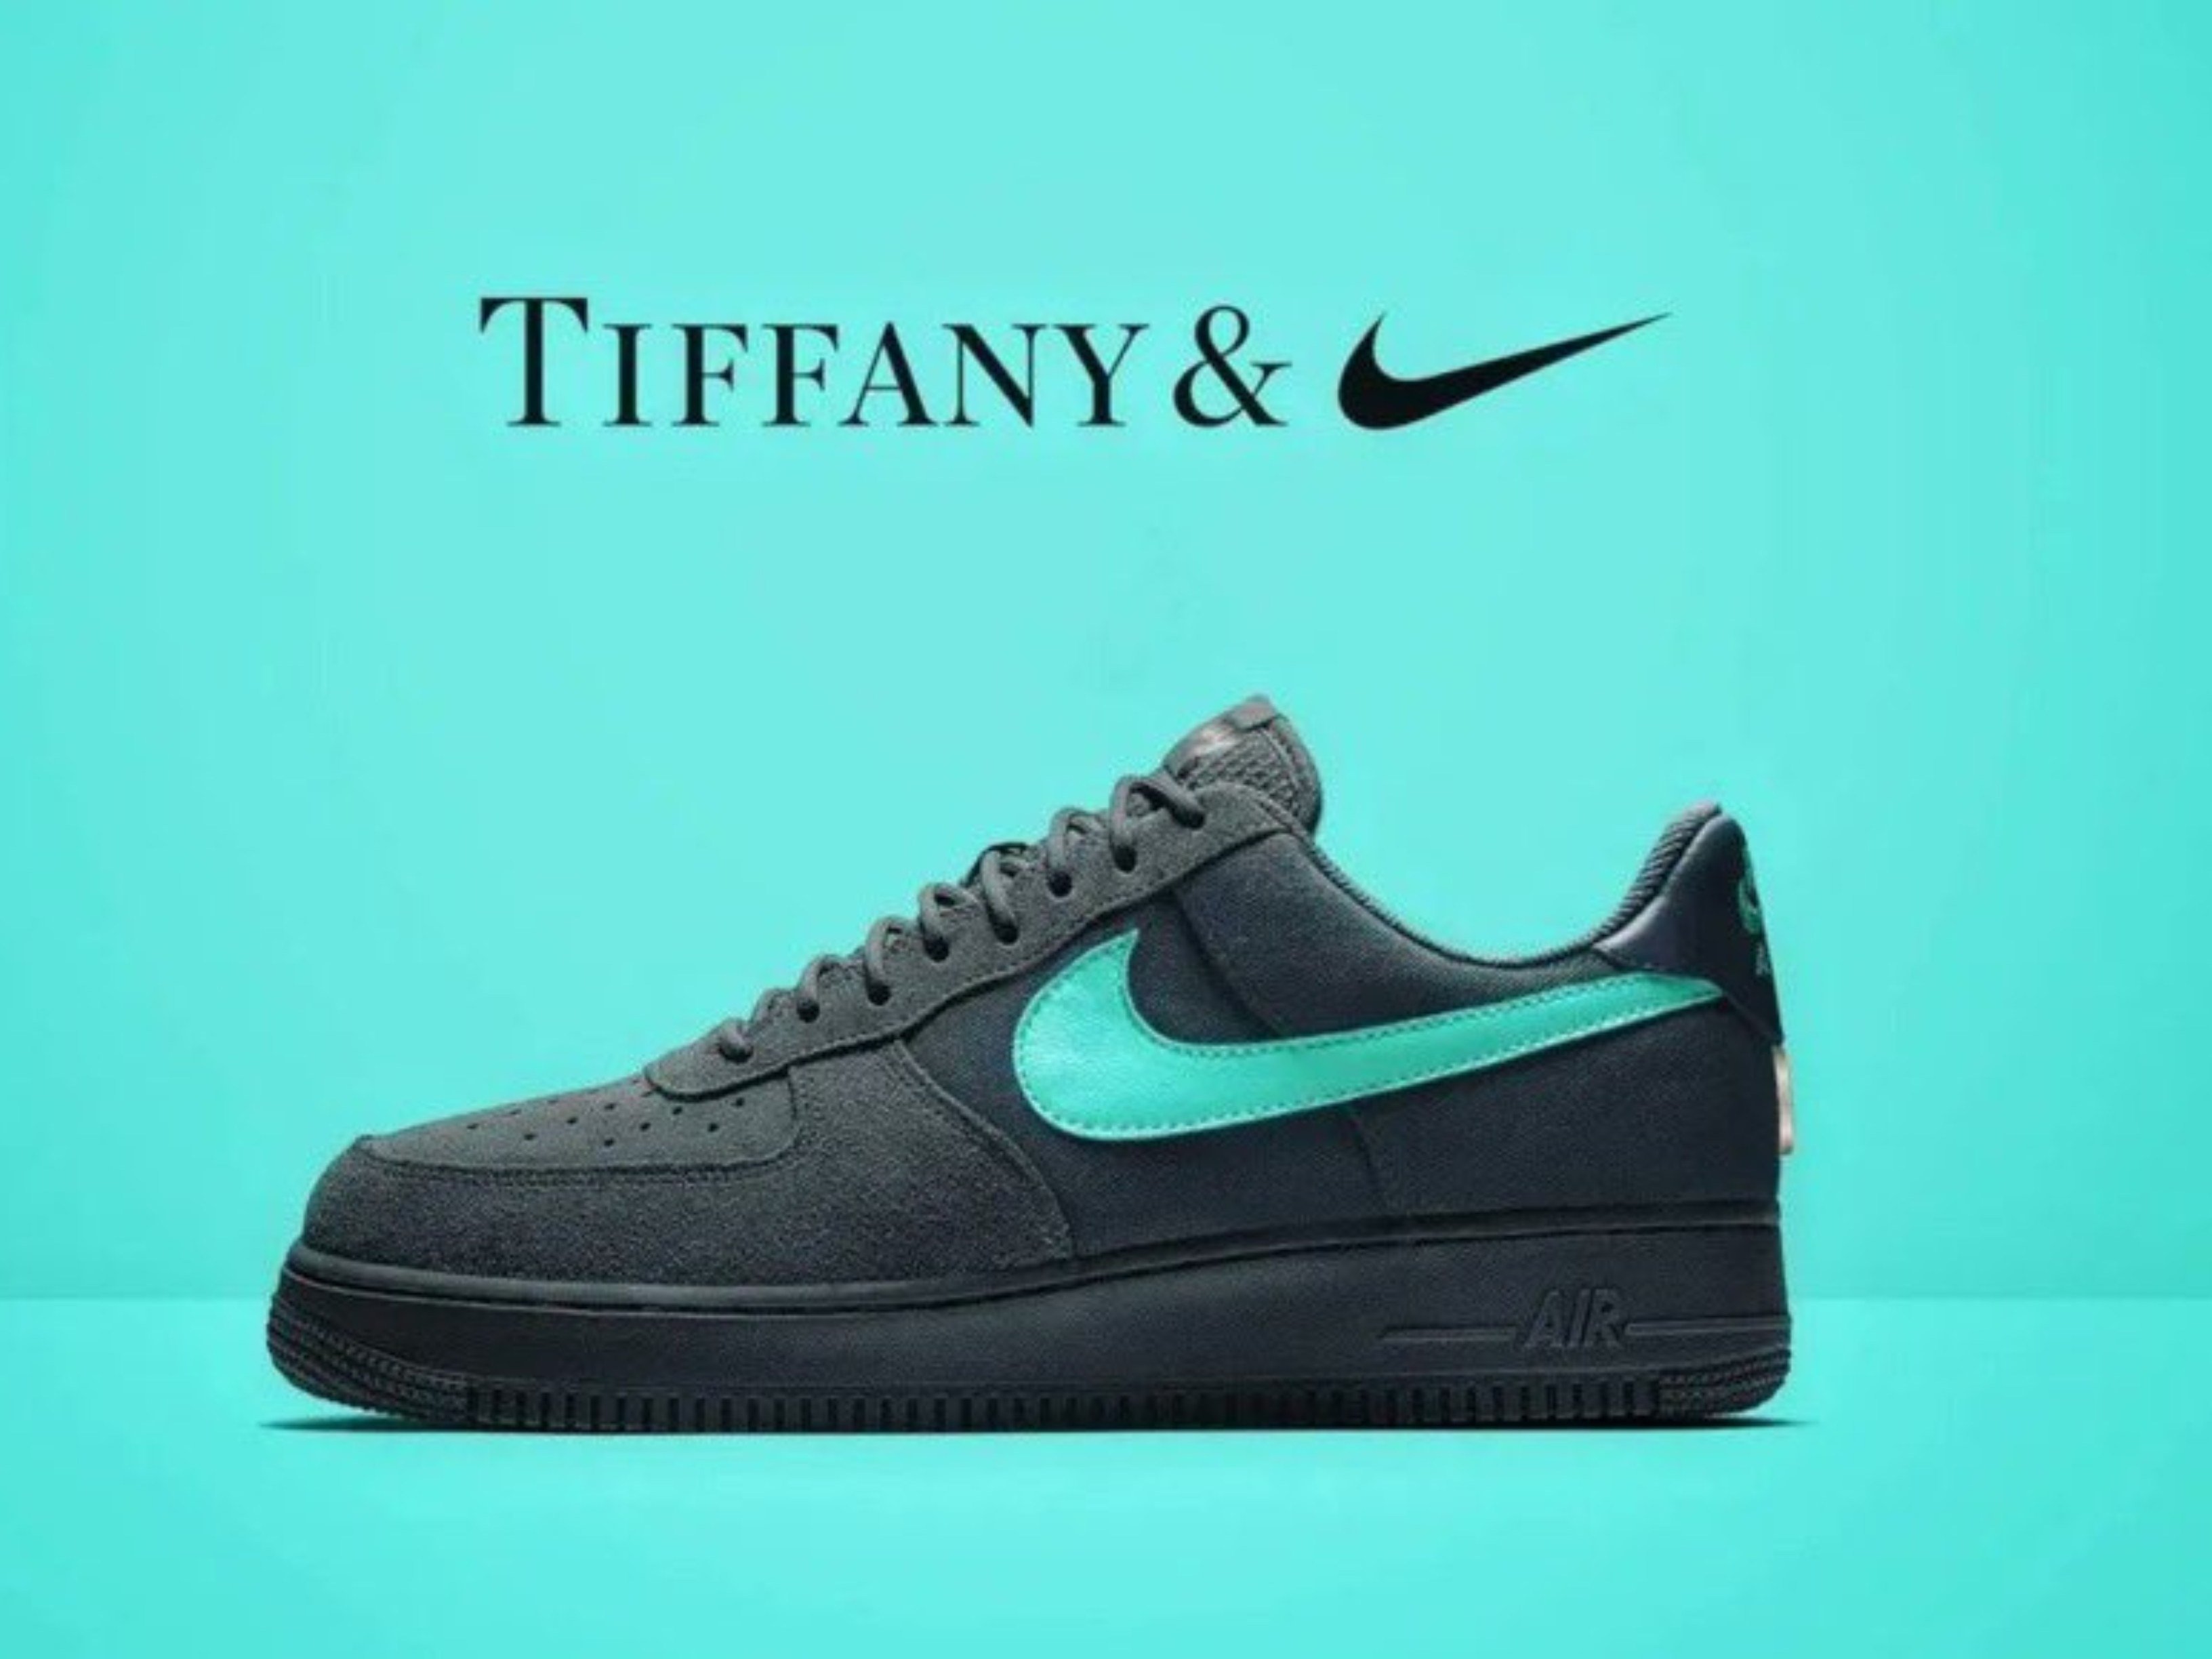 Sentirse mal Radar atributo Nike and Tiffany & Co. to launch US$400 sneakers: the Air Force 1 '1837'  limited-edition shoe collaboration comes after the LVMH brand worked with  Beyoncé and Jay-Z – but some are calling